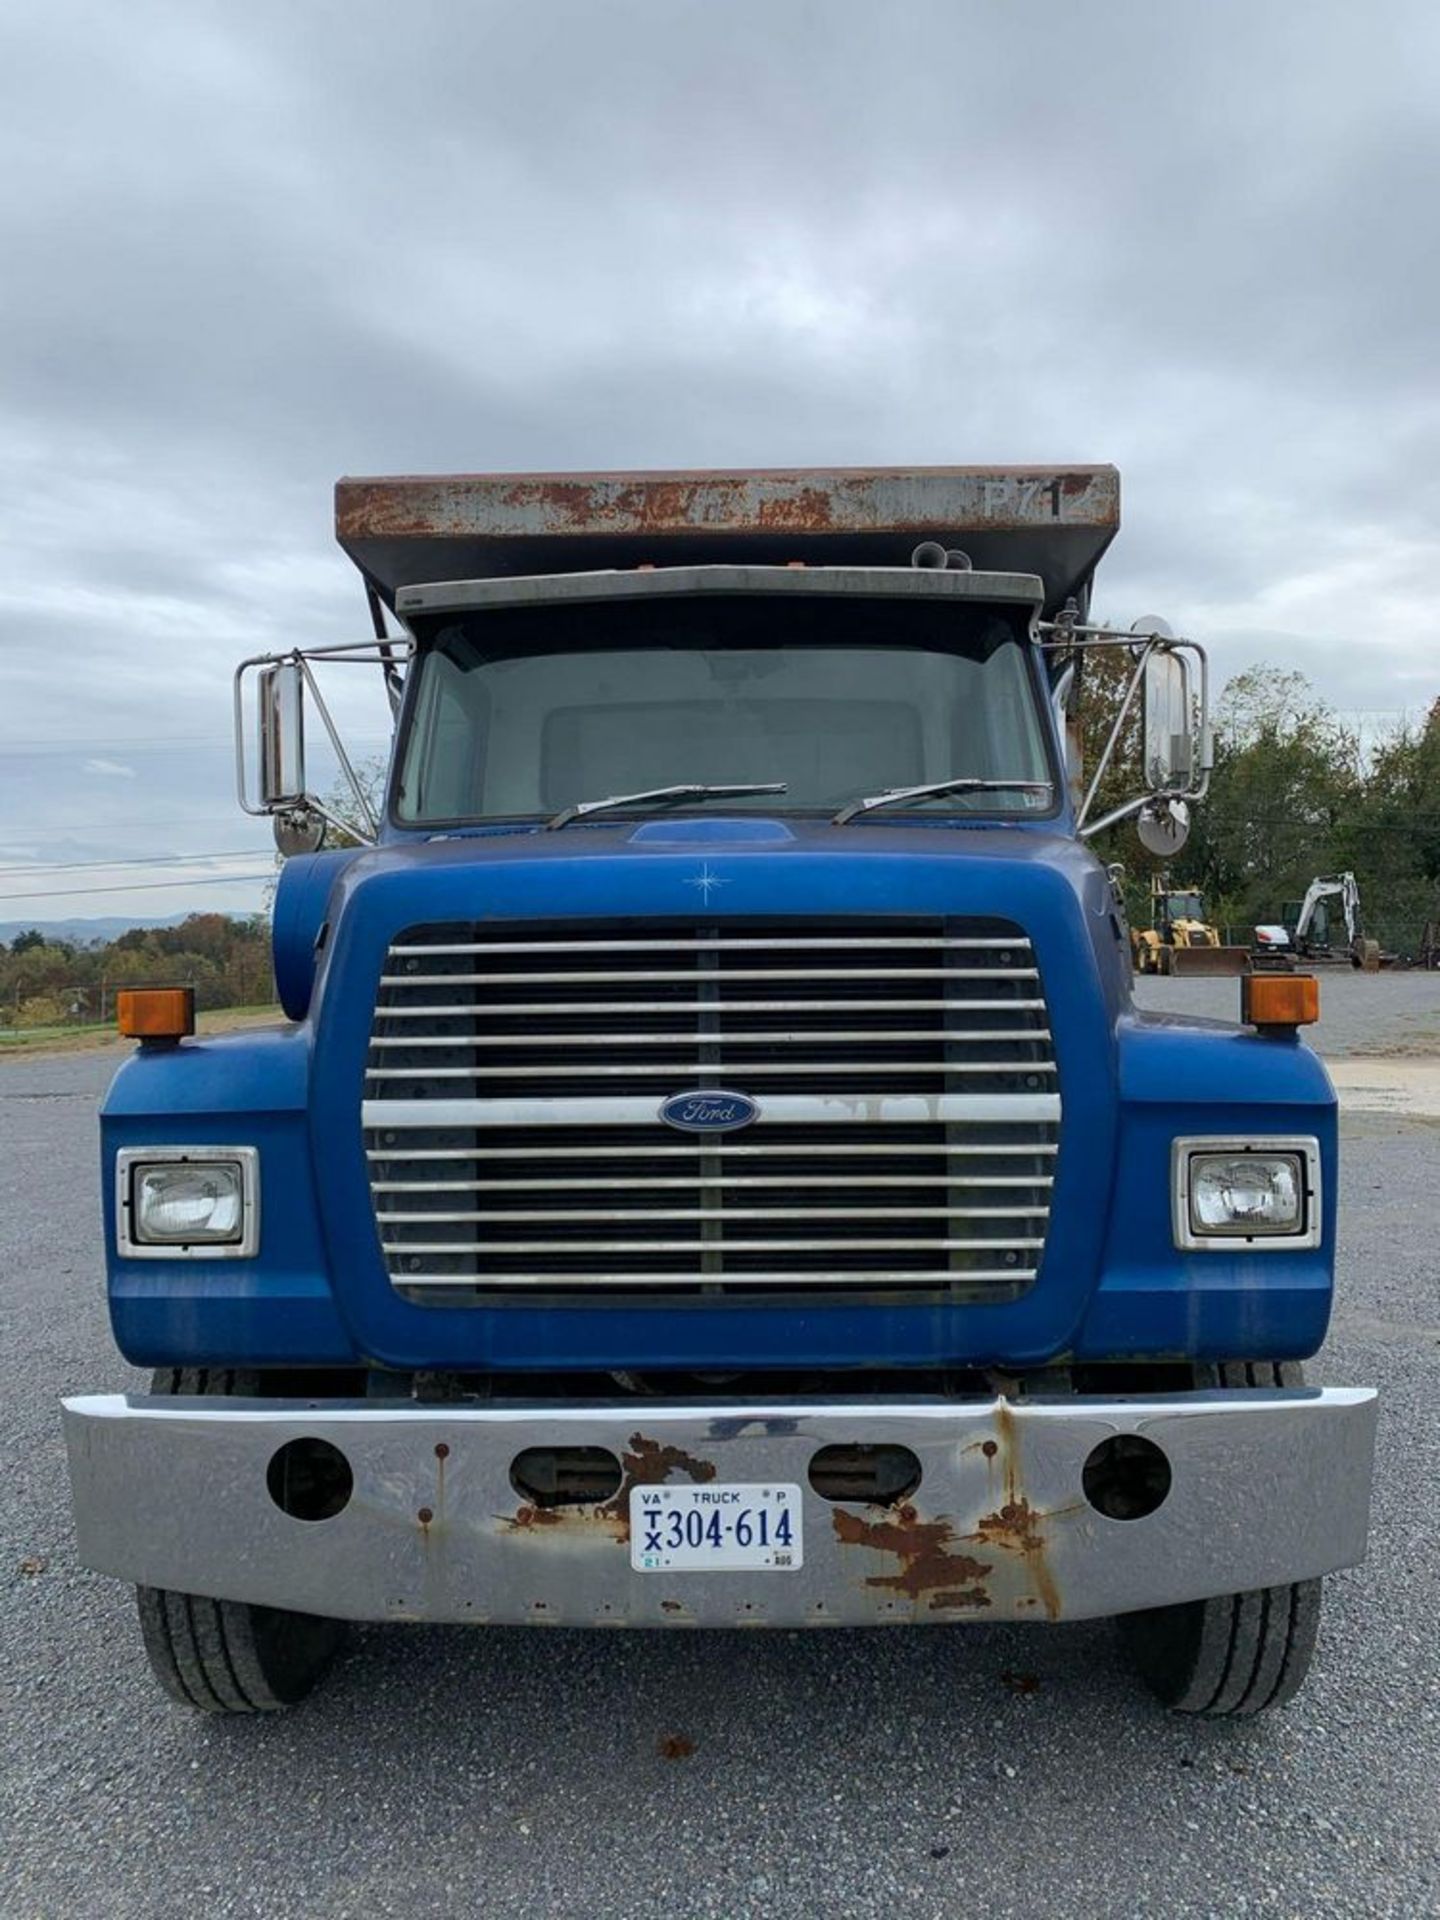 1990 FORD L9000 S/A DUMP TRUCK - Image 12 of 72